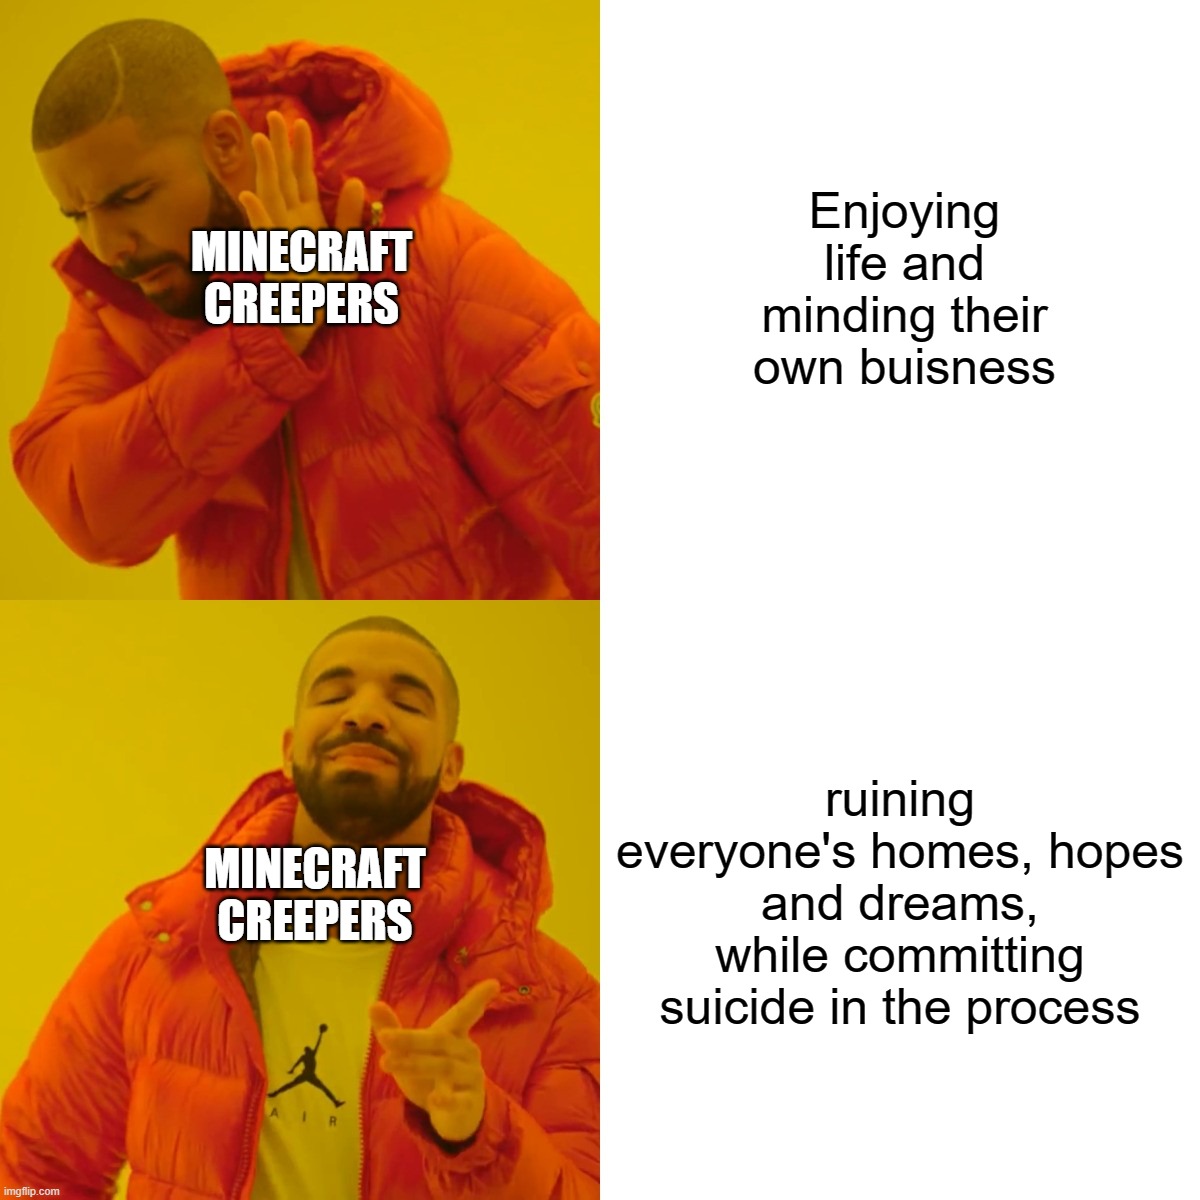 Drake Hotline Bling Meme | Enjoying life and minding their own buisness; MINECRAFT
CREEPERS; ruining everyone's homes, hopes and dreams, while committing suicide in the process; MINECRAFT
CREEPERS | image tagged in memes,drake hotline bling | made w/ Imgflip meme maker